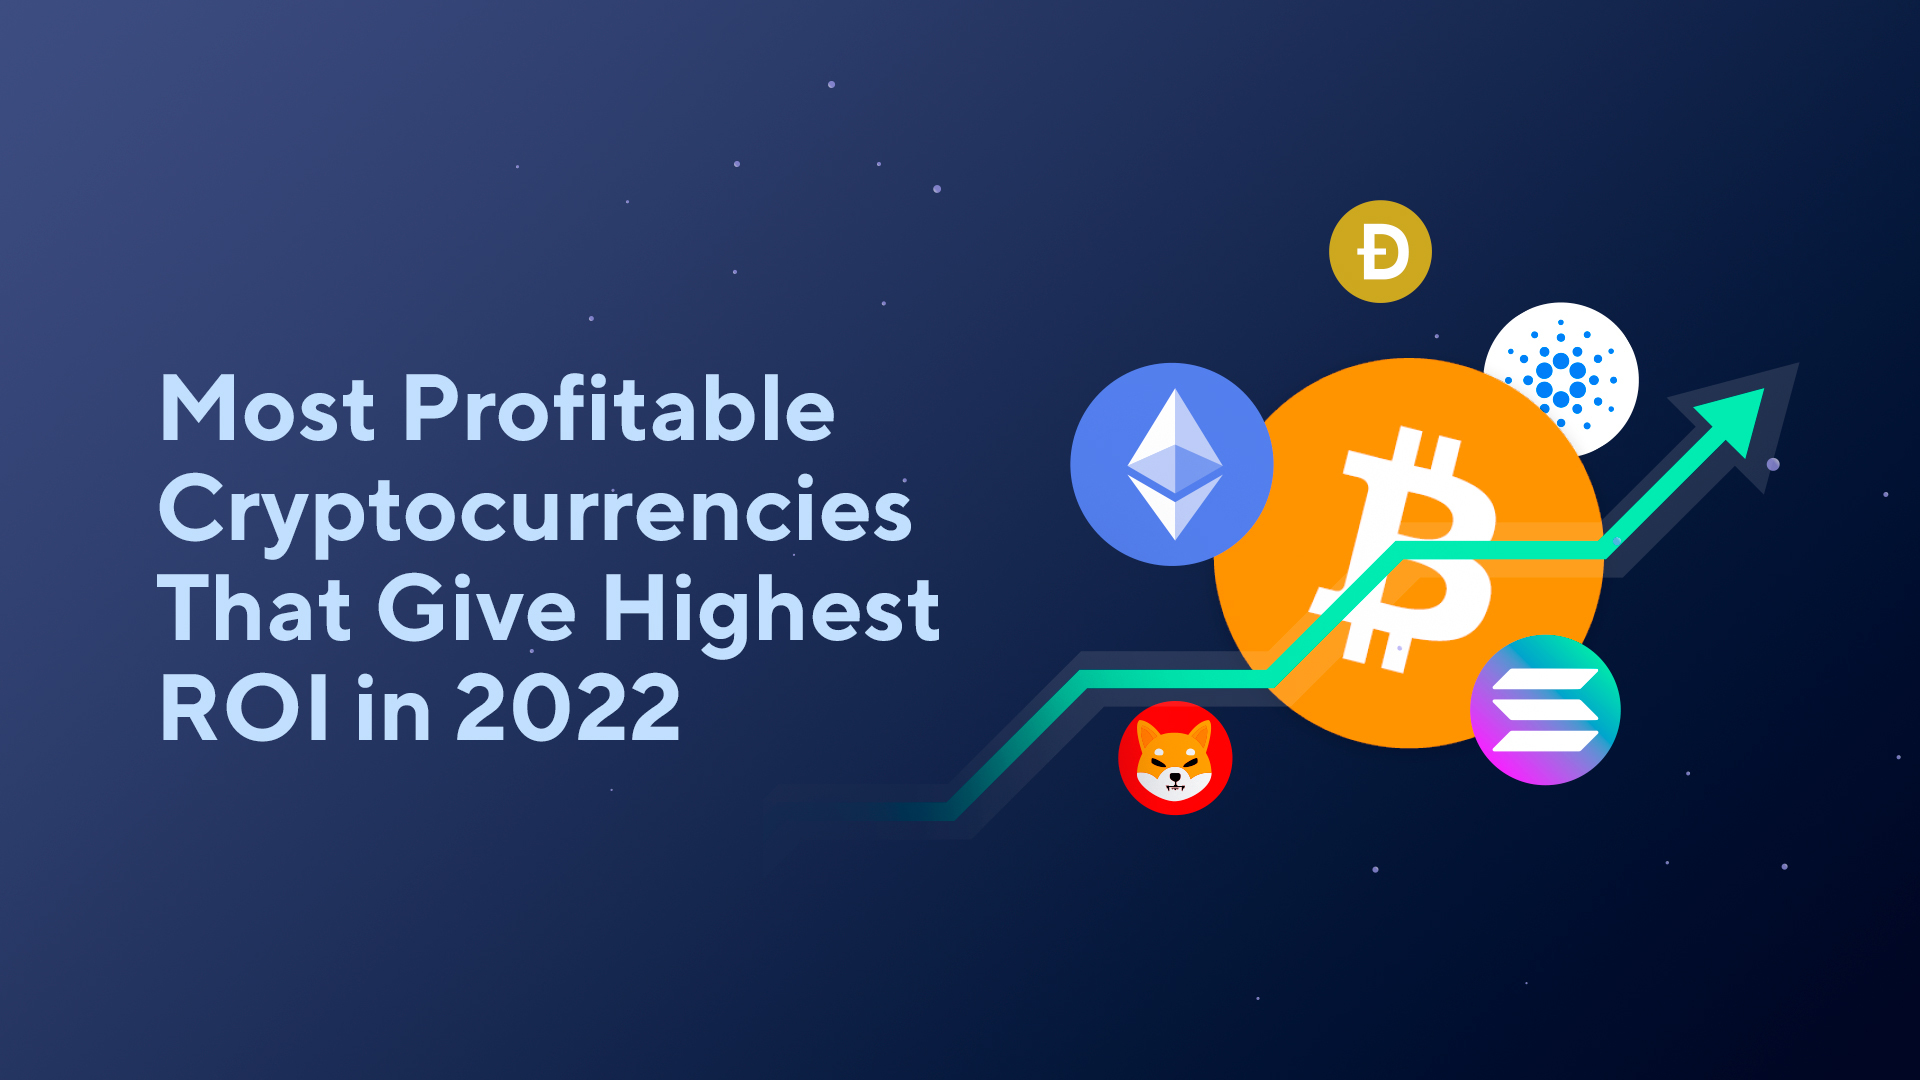 Most Profitable Cryptocurrencies That Give Highest ROI in 2022